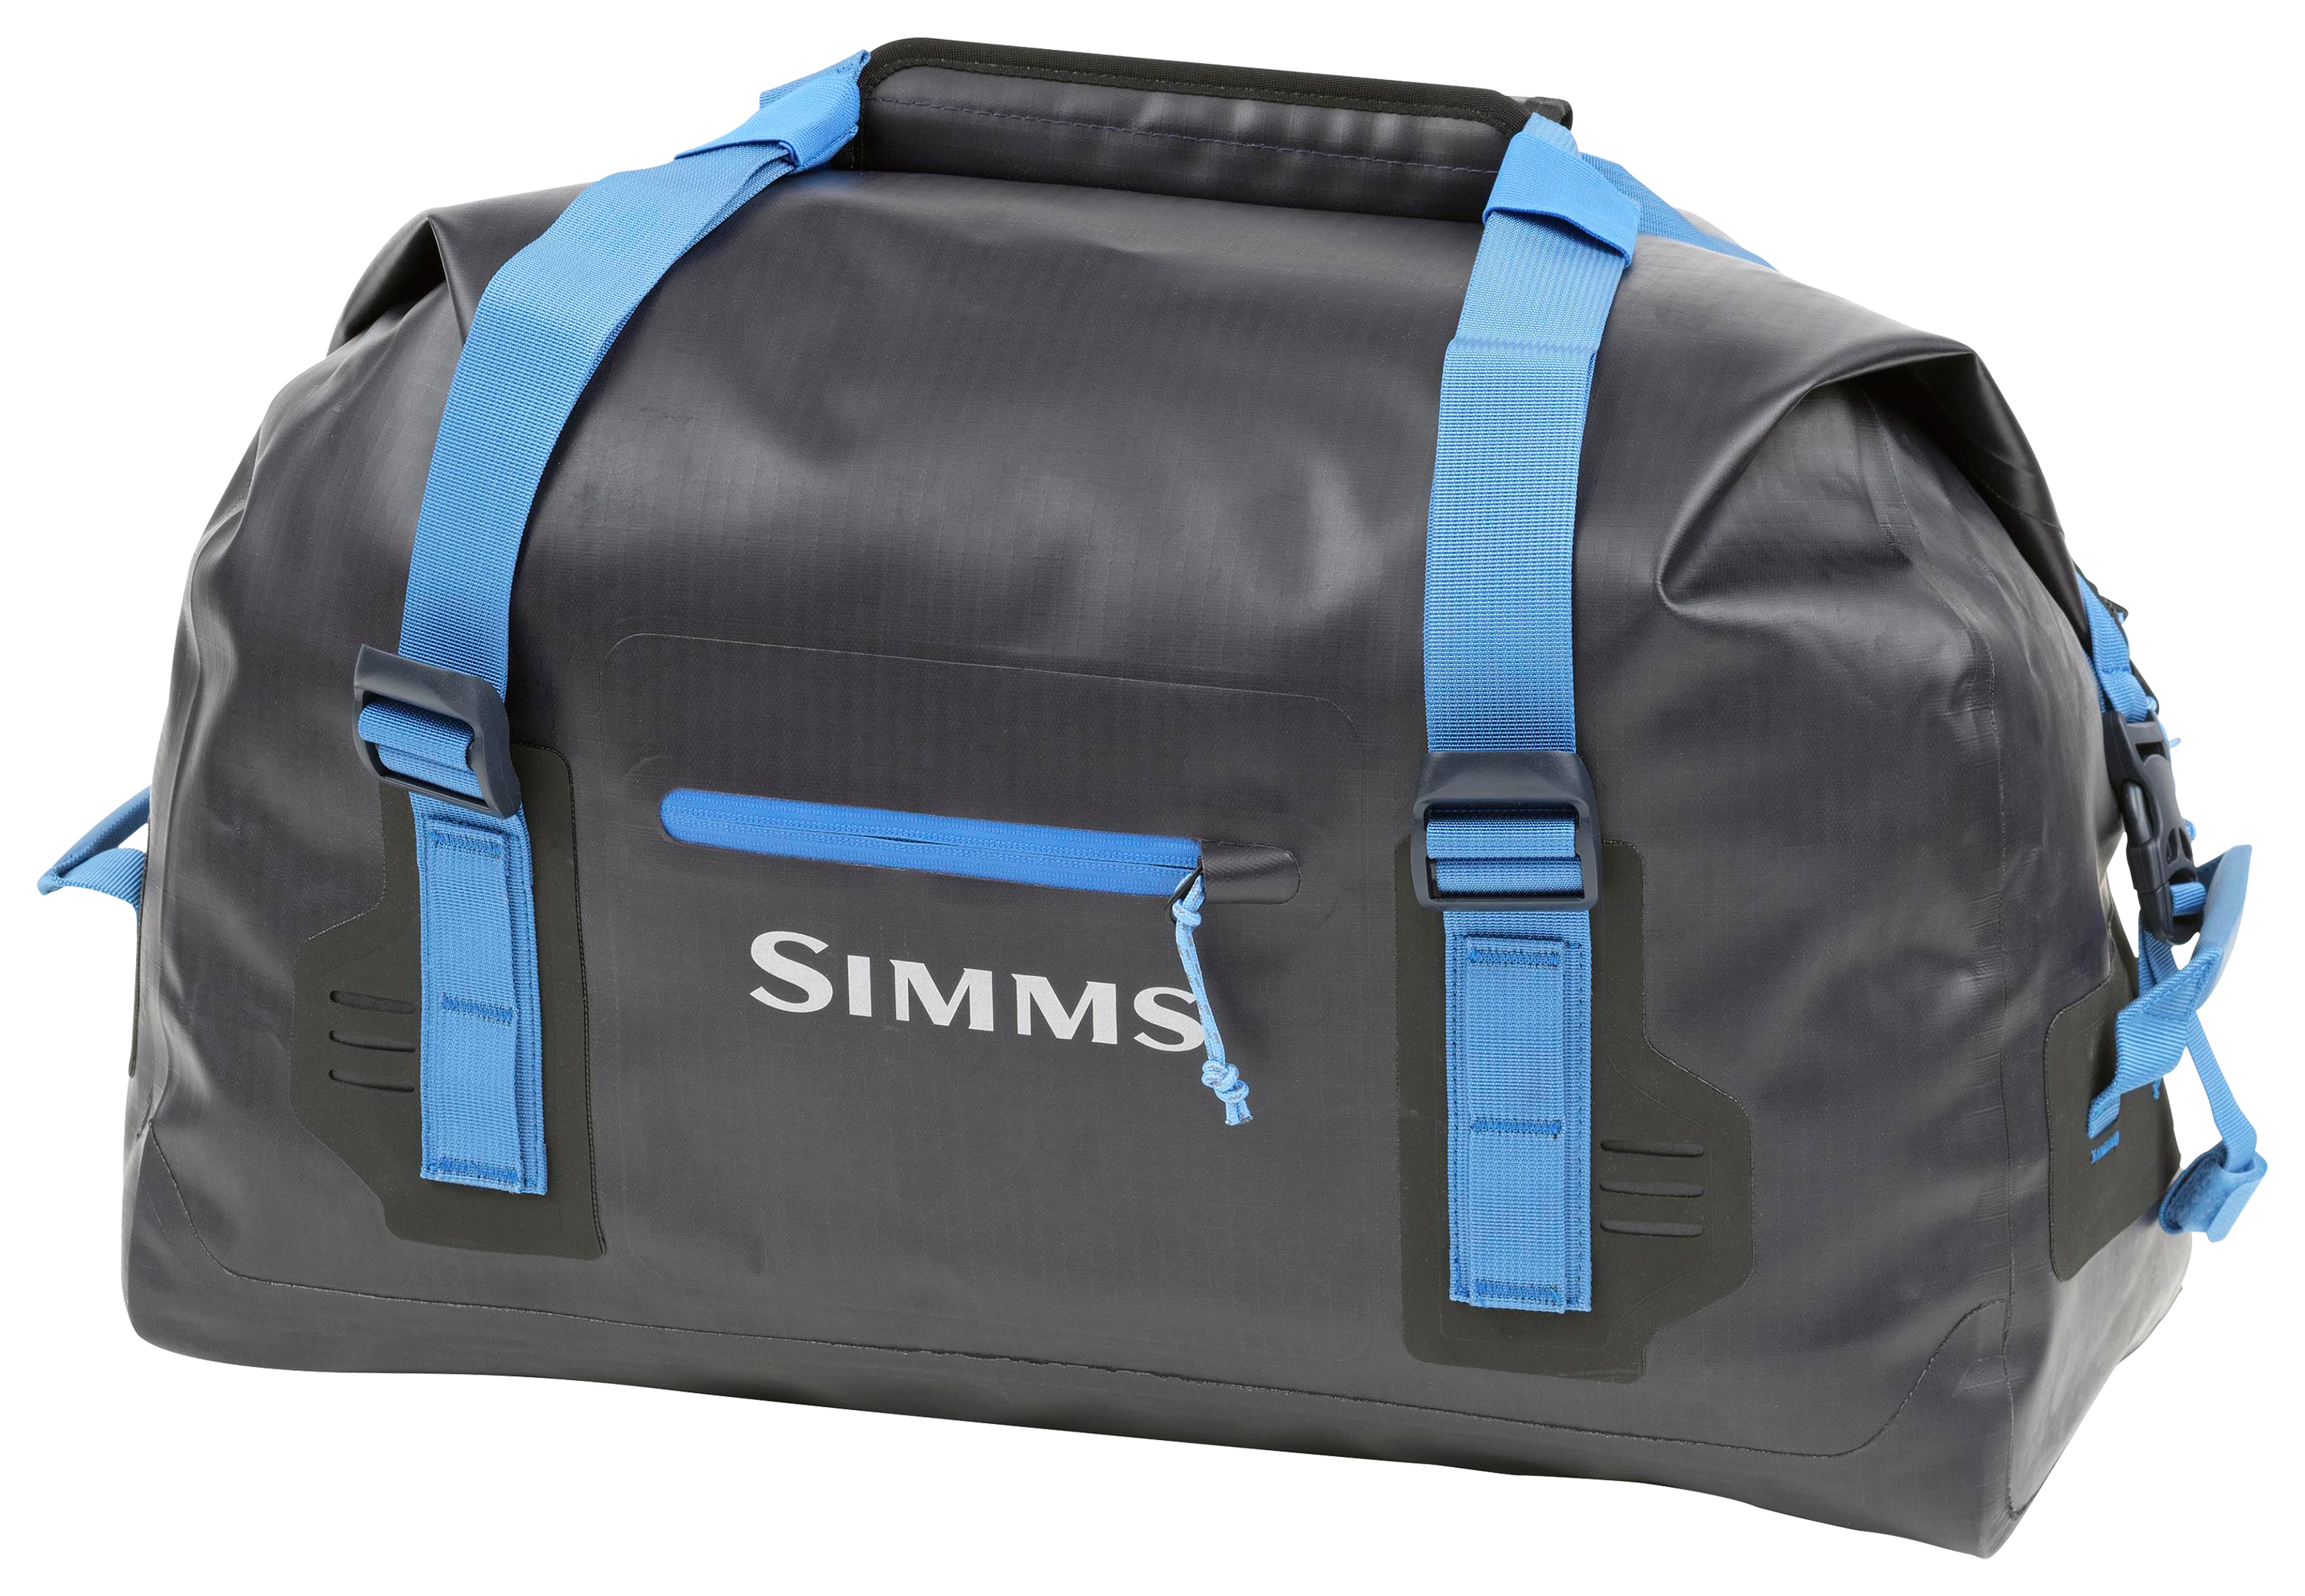 Keeping electronics dry while fly fishing with Simms Dry Creek